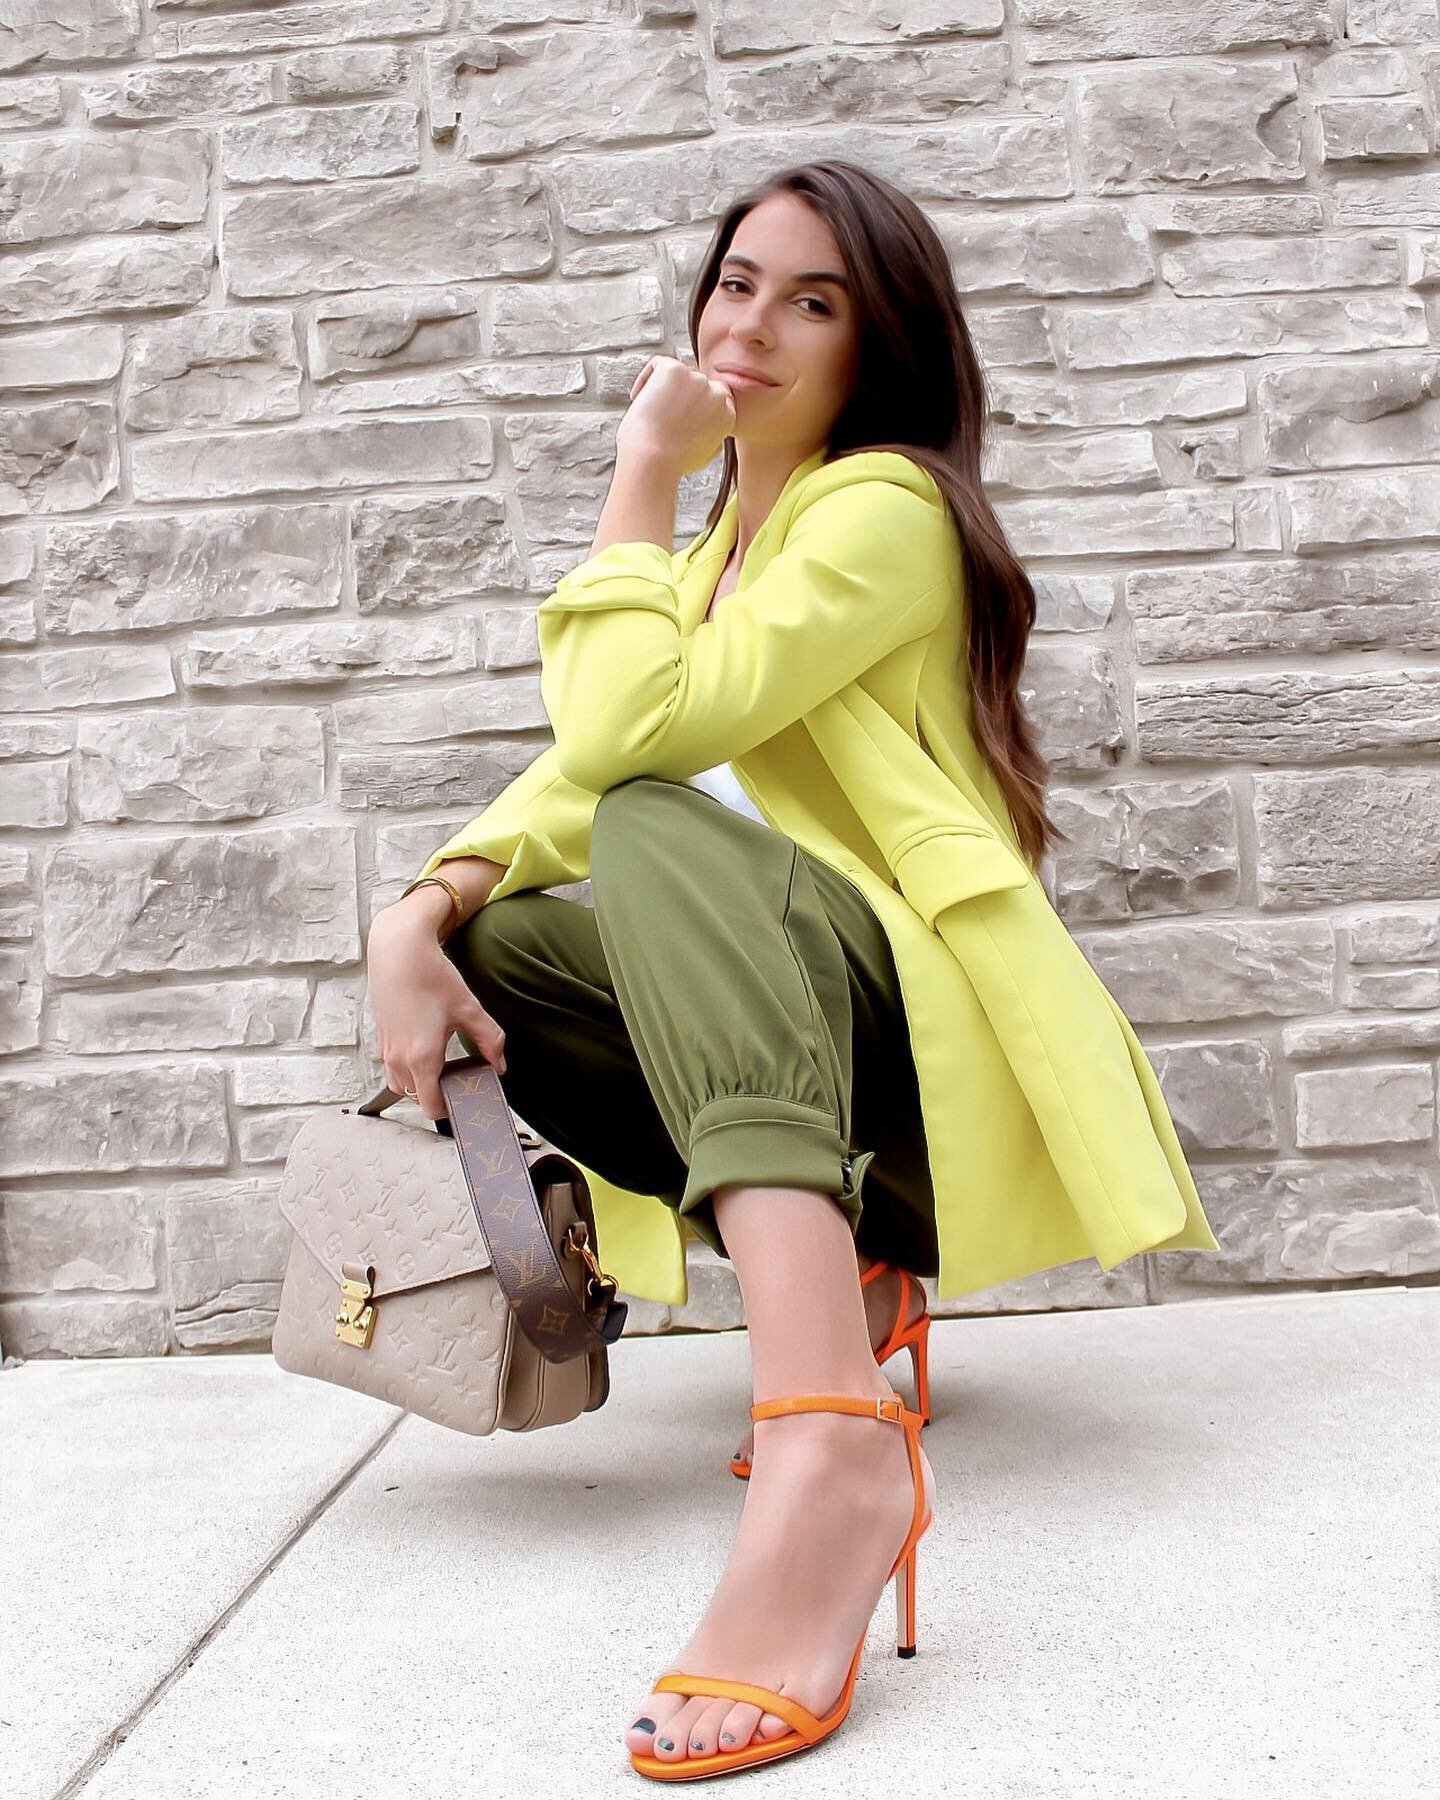 I was going to use some colorful language in my caption, but I didn&rsquo;t want to offend hue 🧡

Sharing some favorite colorful pieces like this @elliatt neon blazer and 5 colors to incorporate into your wardrobe this spring and summer on the blog 